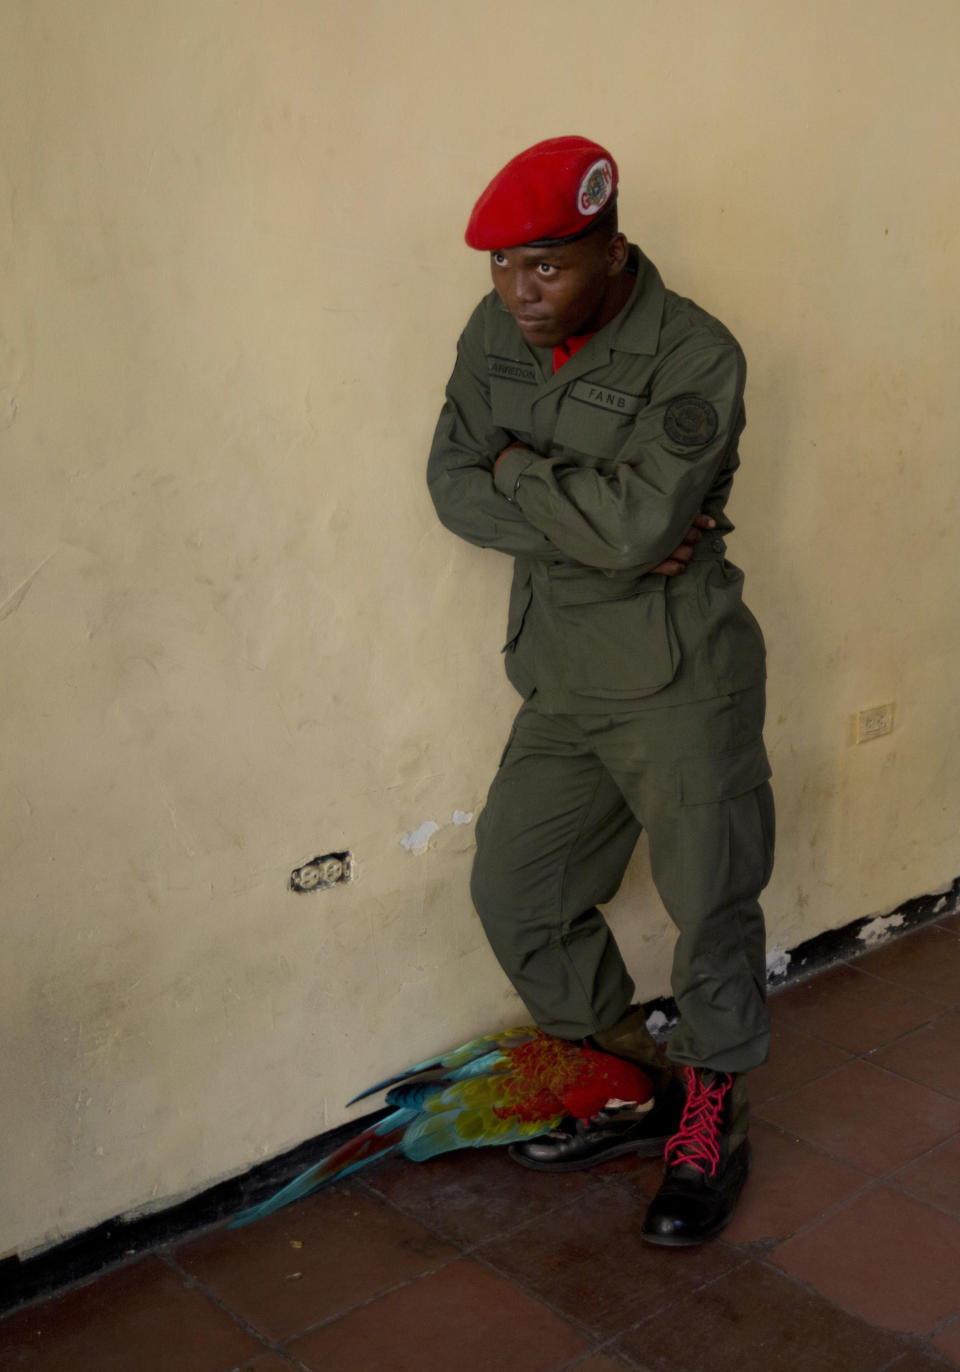 A presidential guard waits to cast his ballot at a school serving as a voting center, as the school's mascot parrot plays with his shoes in Caracas, Venezuela, Sunday, Dec. 9, 2018. Venezuelans headed to the polls Sunday to elect local city councils amid widespread apathy driven by a crushing economic crisis and threats of expulsion by opposition groups for candidates who participate in what they consider an "electoral farce." (AP Photo/Fernando Llano)